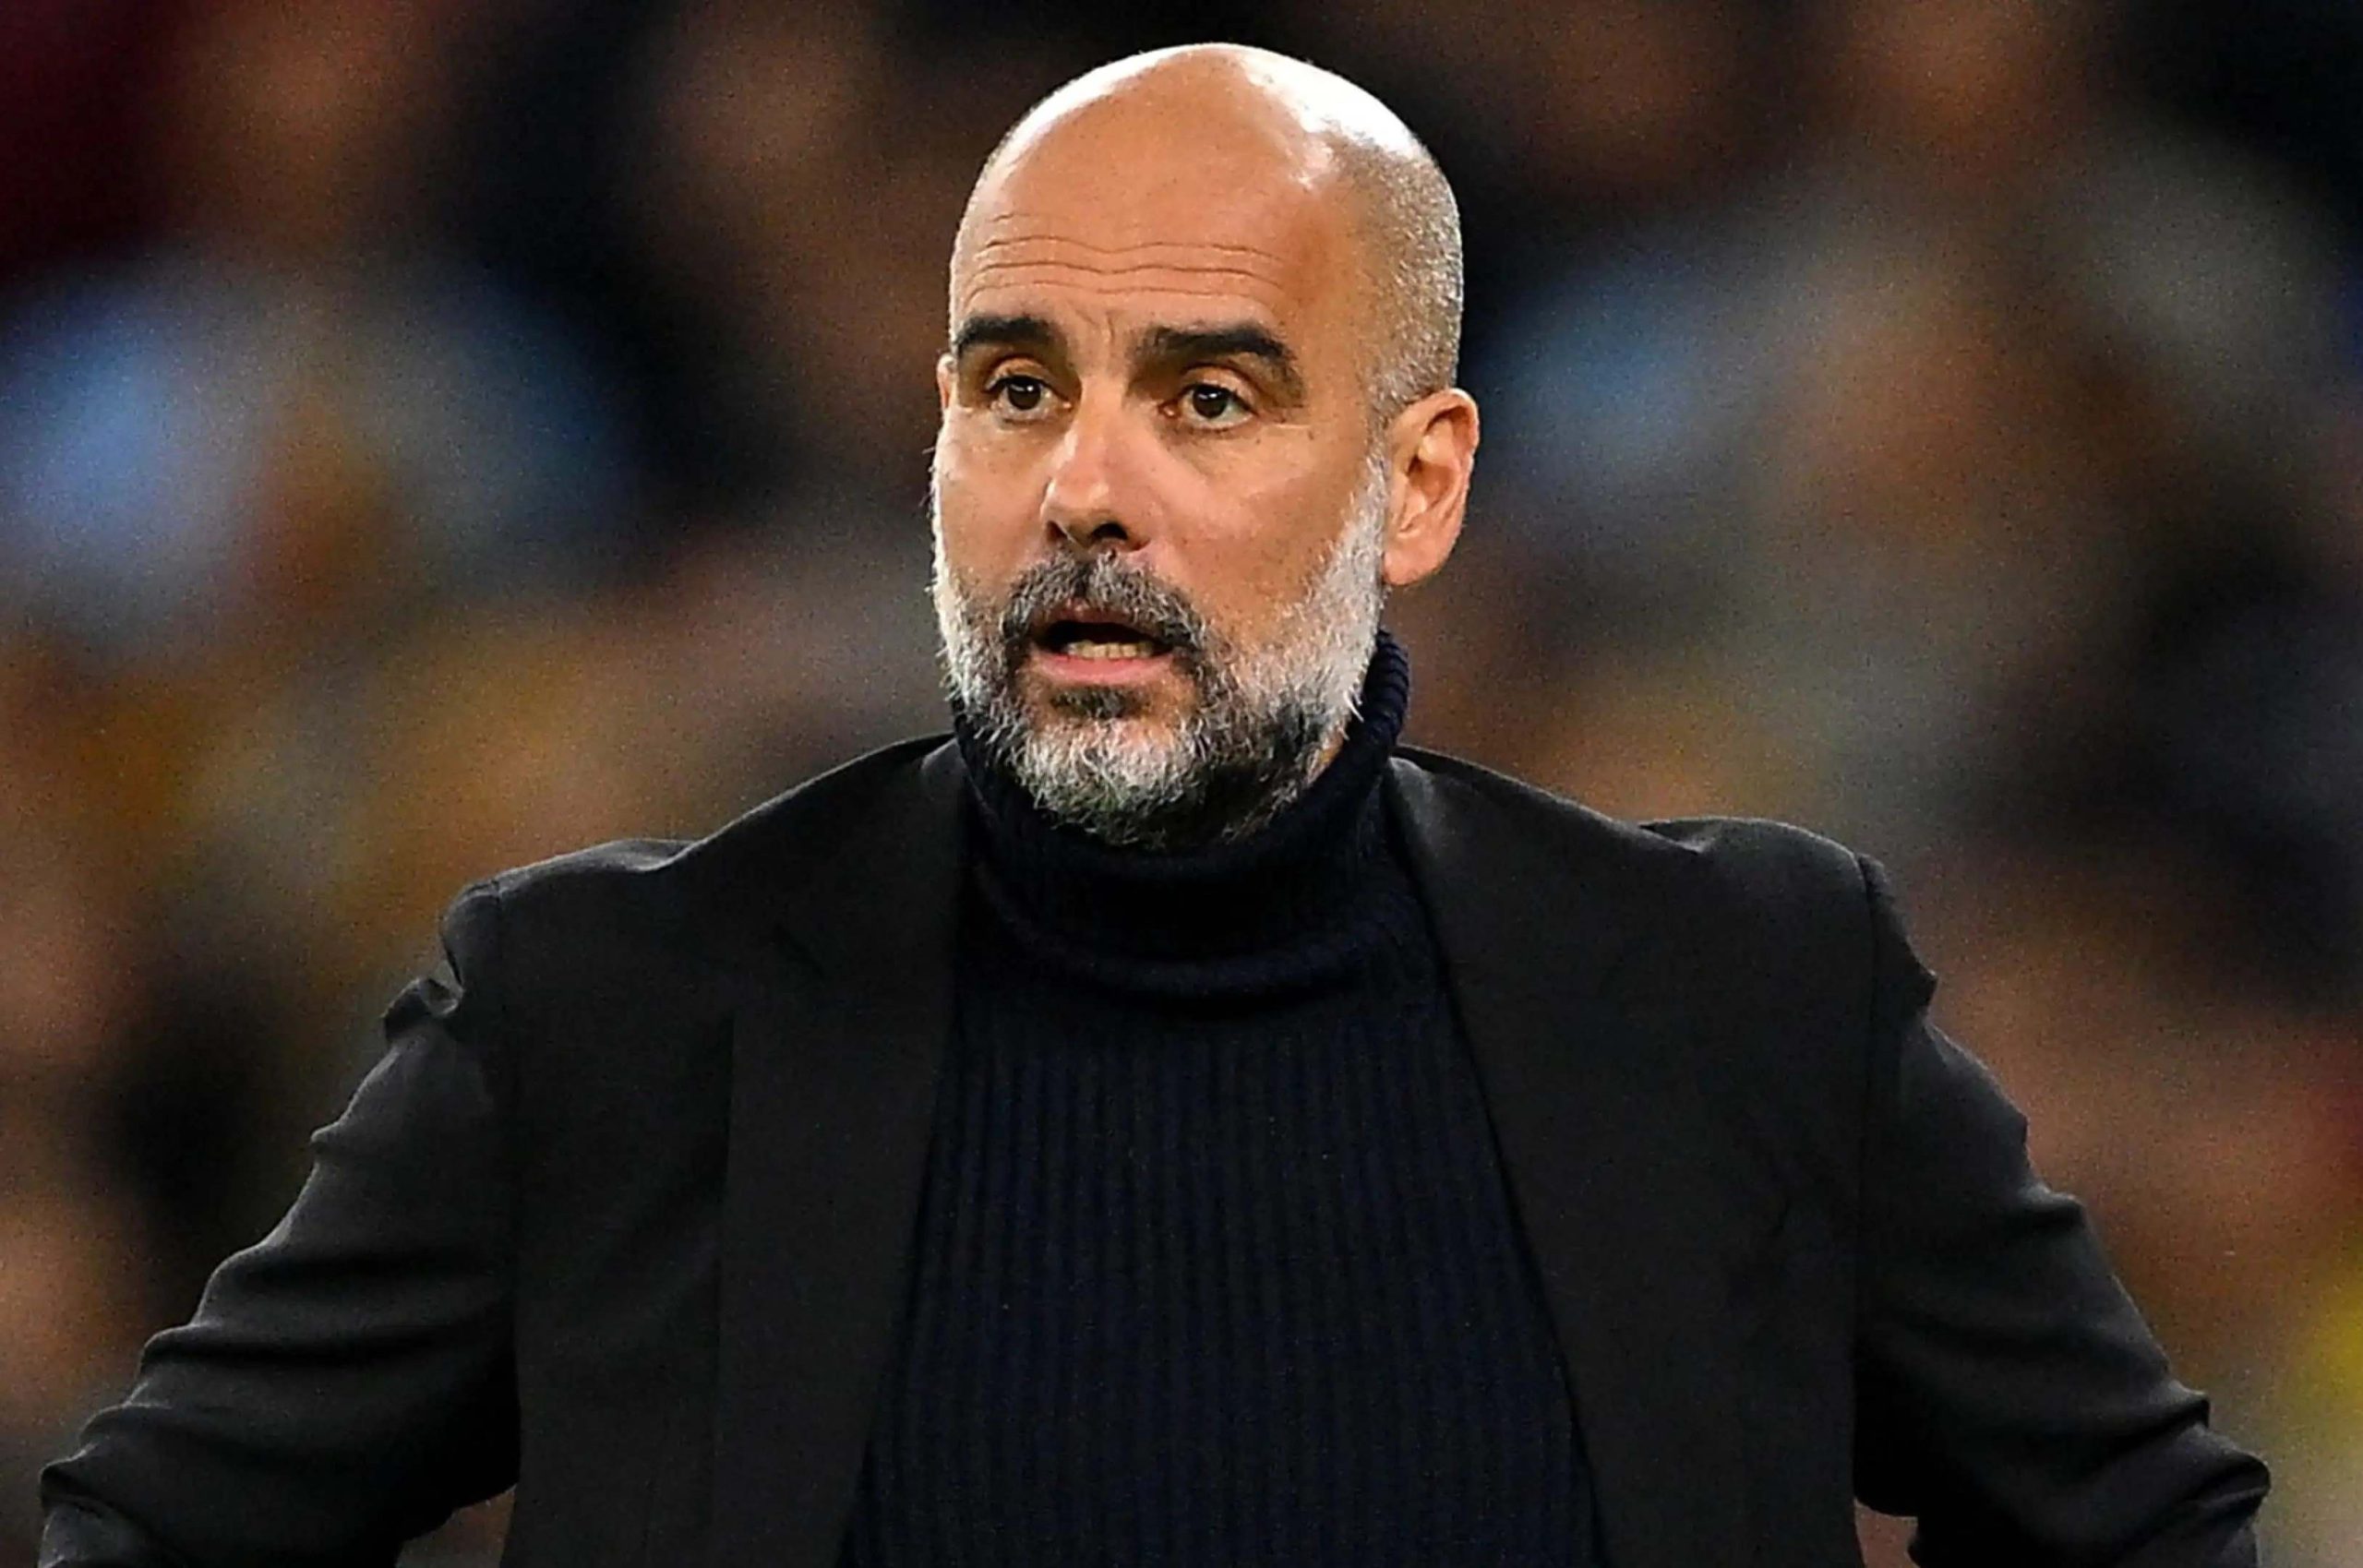 British commentator comes up with strange theory on Guardiola